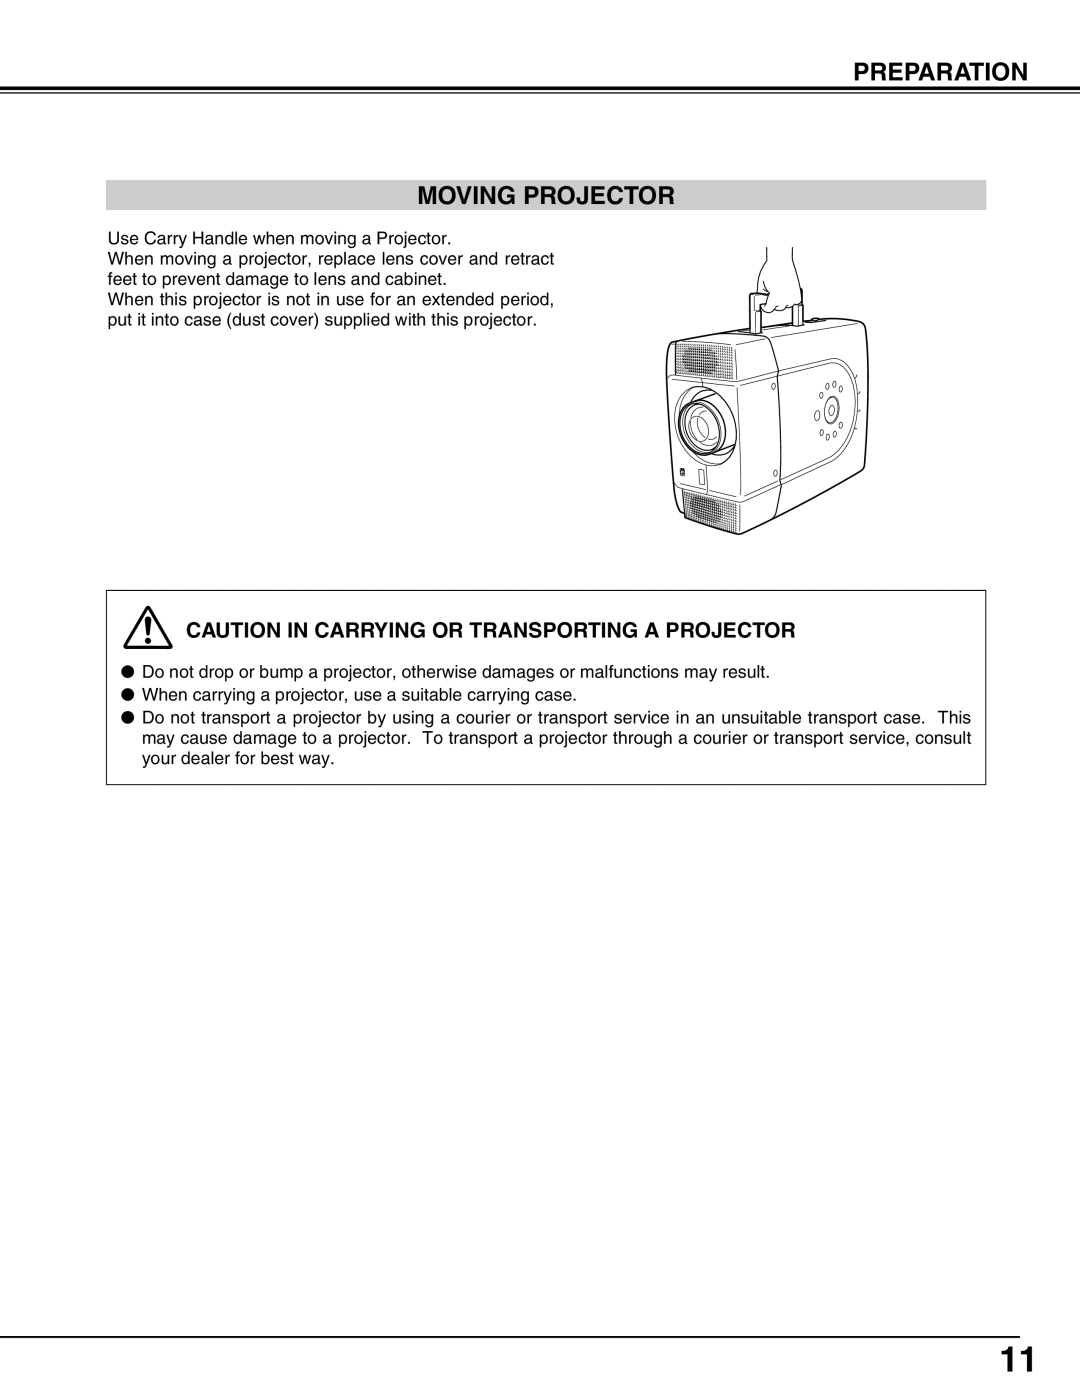 Eiki LC-X60 instruction manual Preparation Moving Projector, Caution In Carrying Or Transporting A Projector 